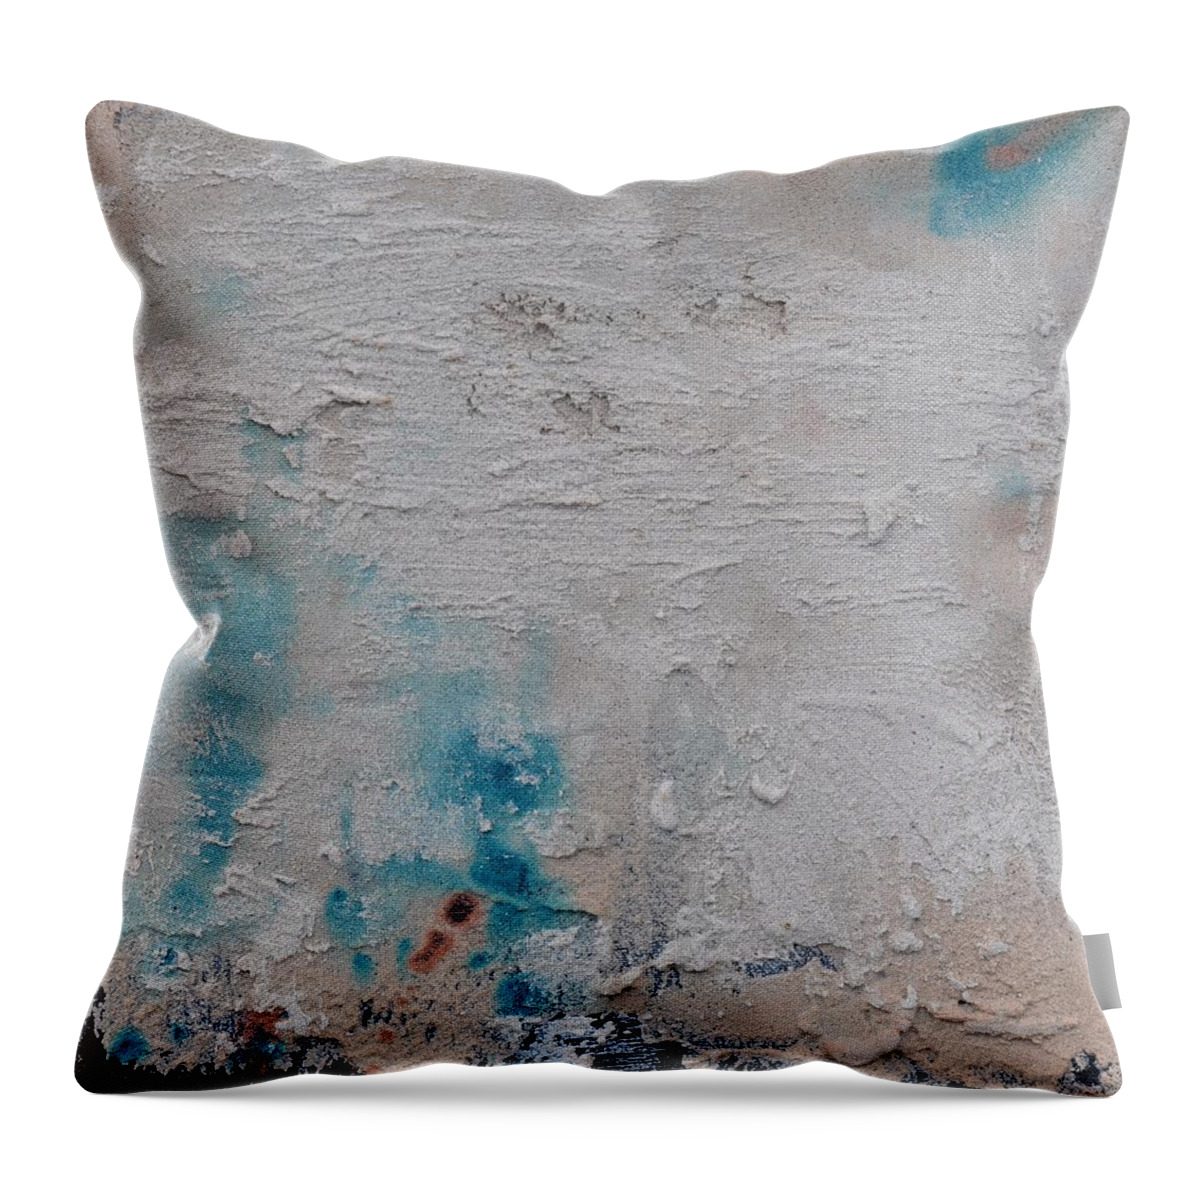 Abstract Throw Pillow featuring the painting Sand Tile AM214133 by Eduard Meinema